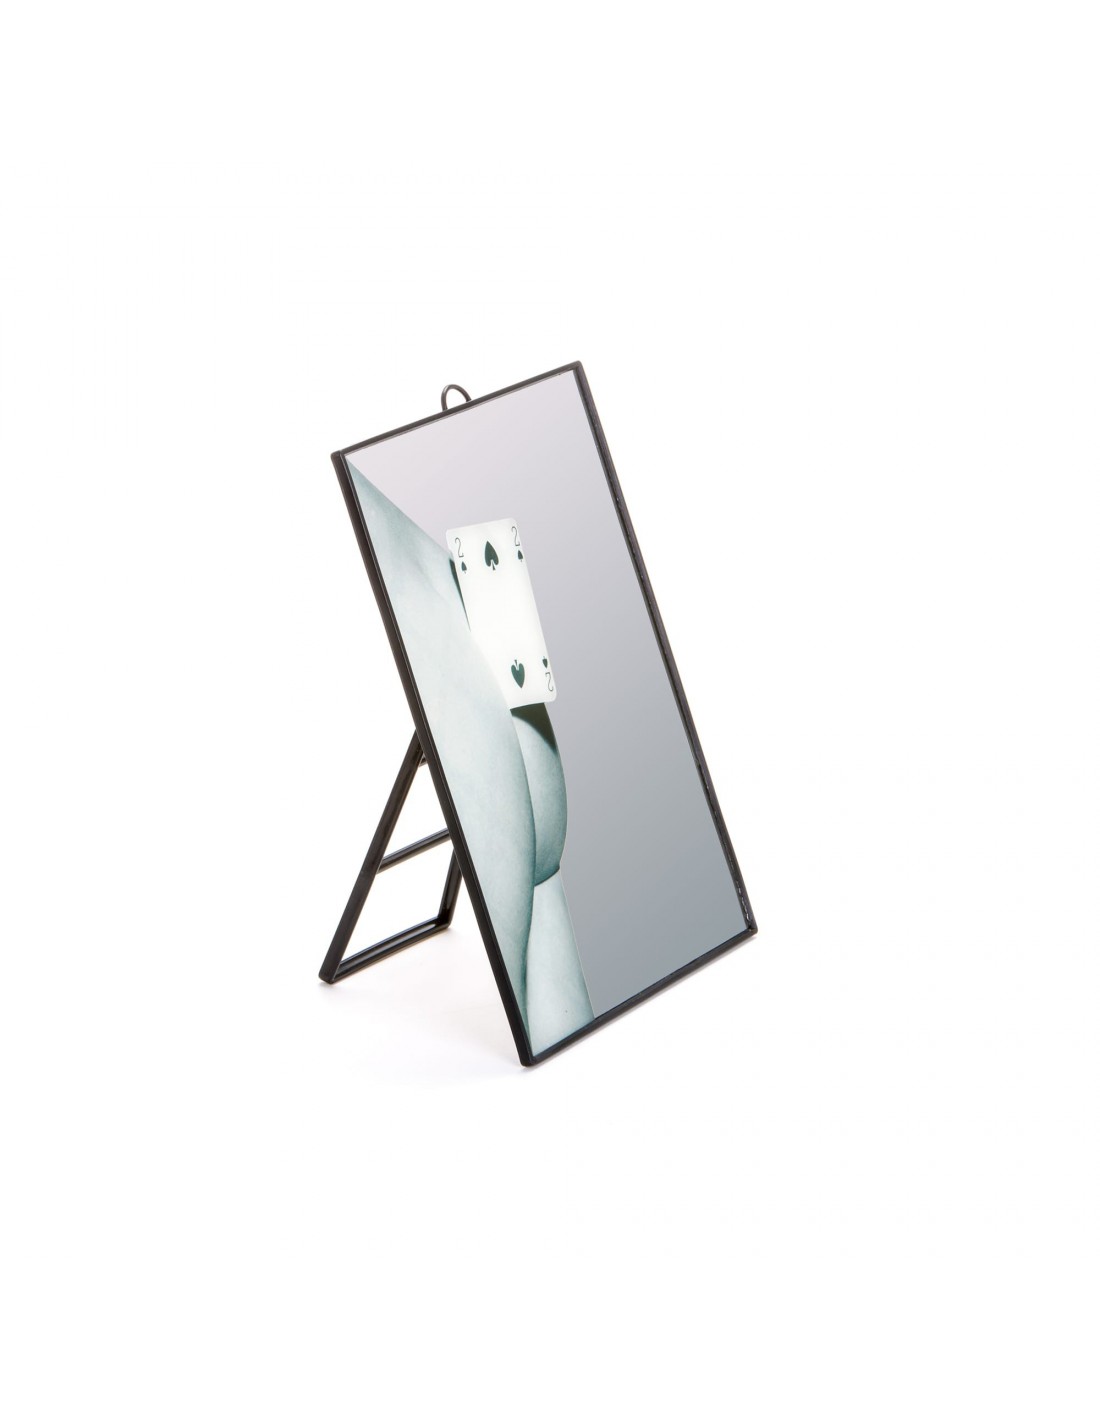 Buy SELETTI Toiletpaper Mirror online? Fast and safe delivery!